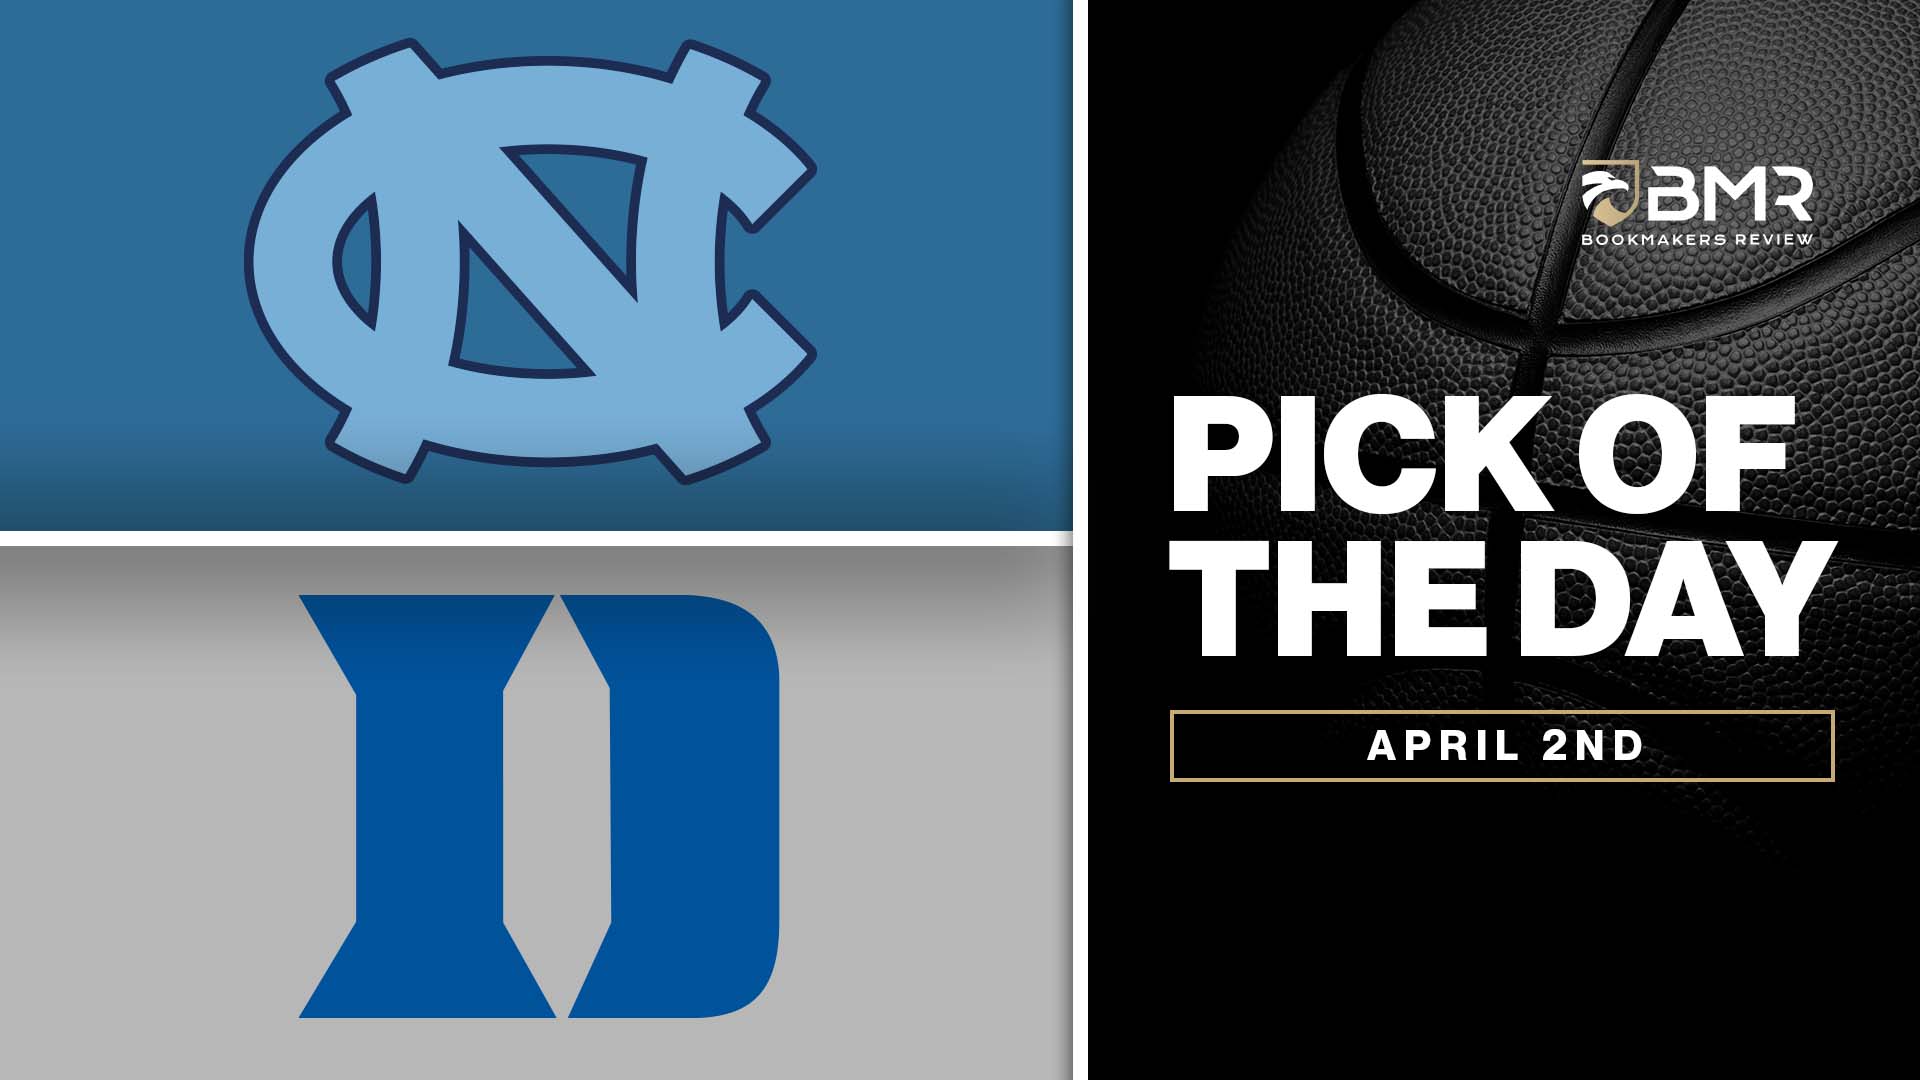 UNC vs. Duke | Free NCAAB March Madness Pick by Le Martin - Apr. 2nd